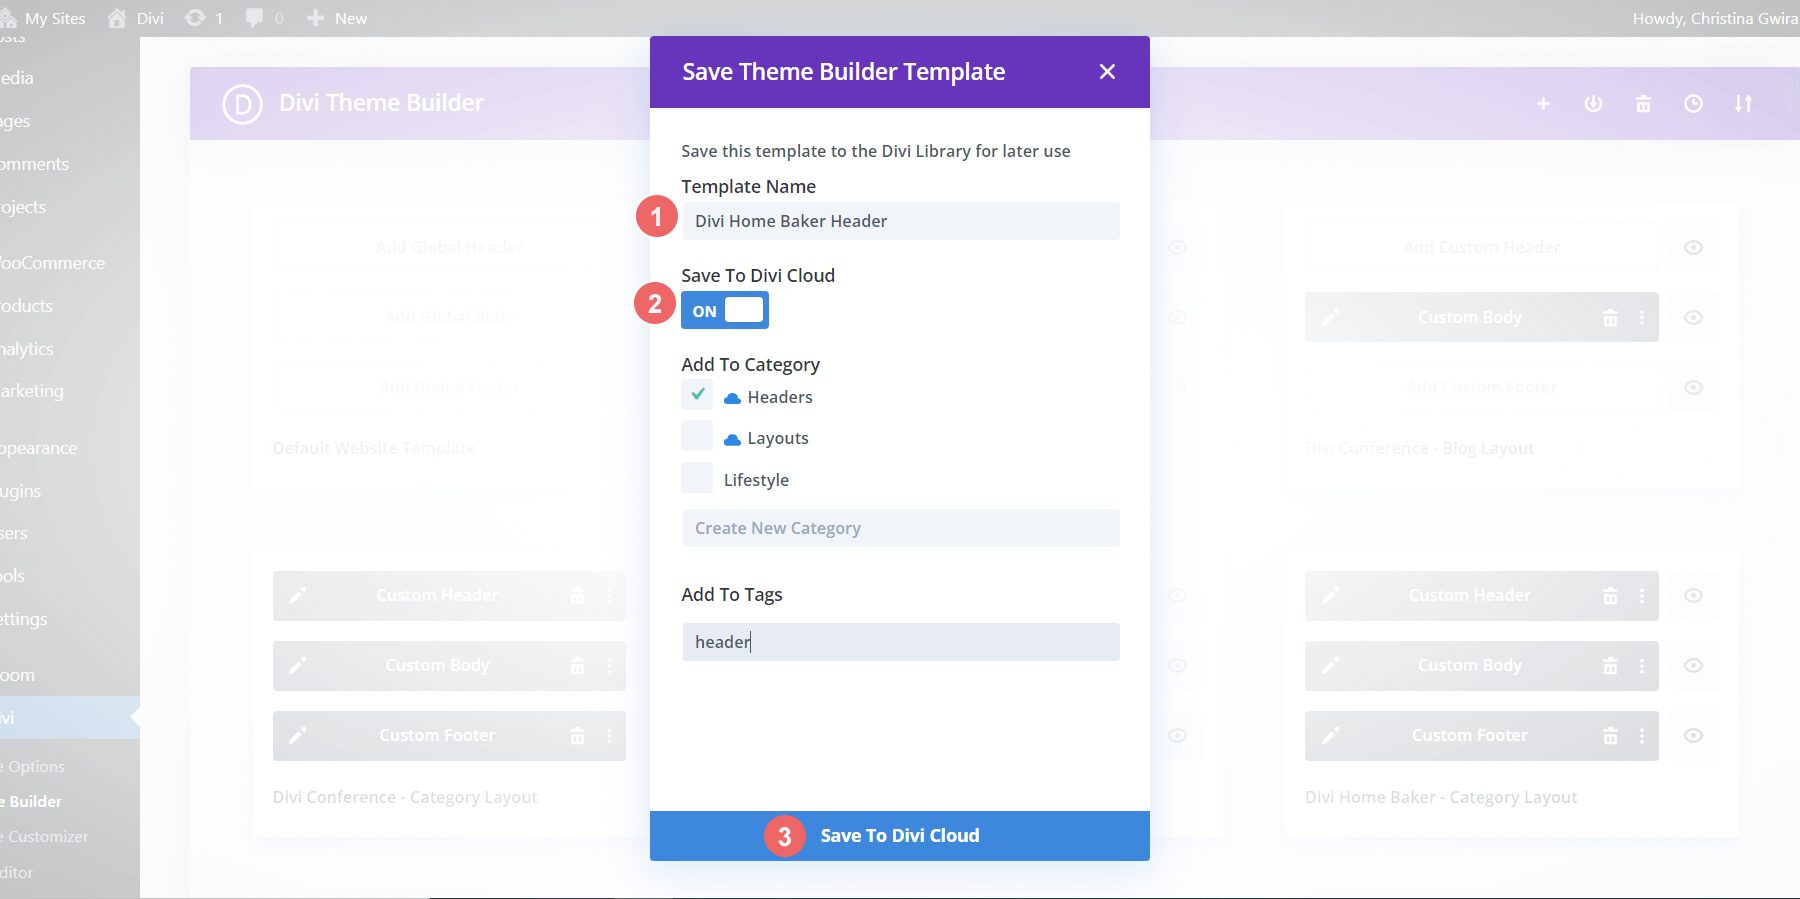 Save your template to Divi Cloud